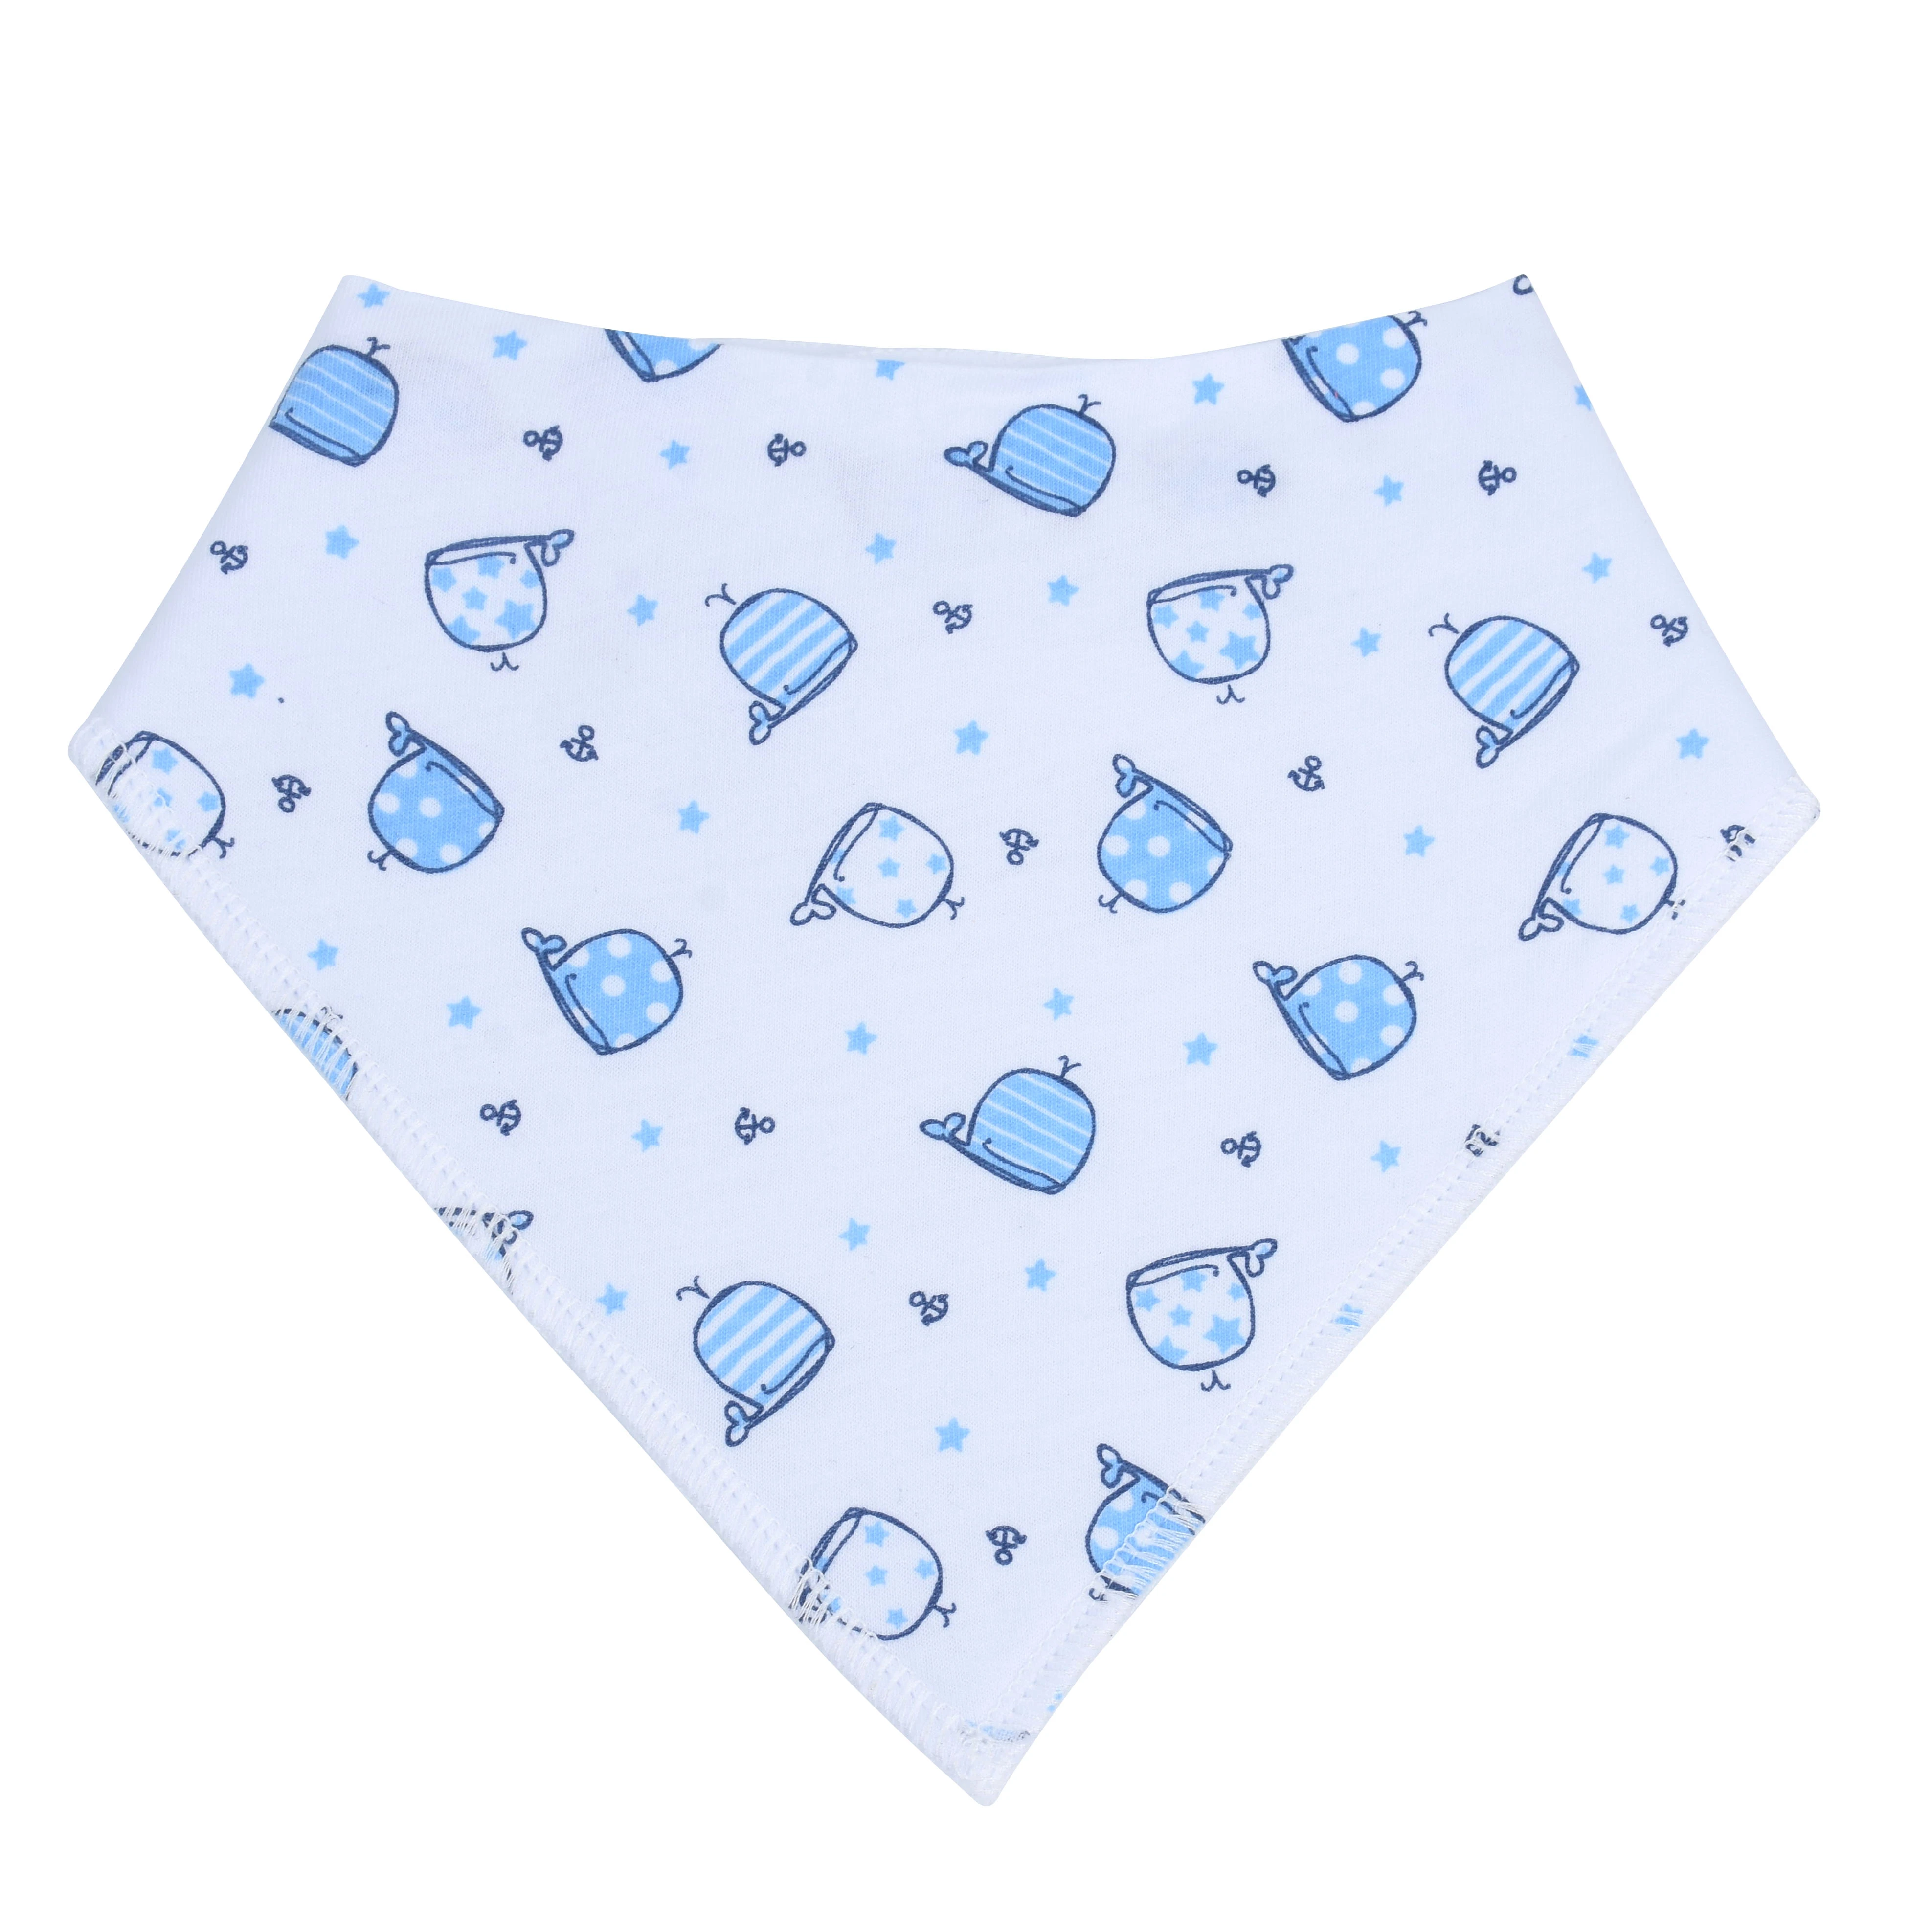 Organic Cotton White Baby Bibs for Infant, Toddler